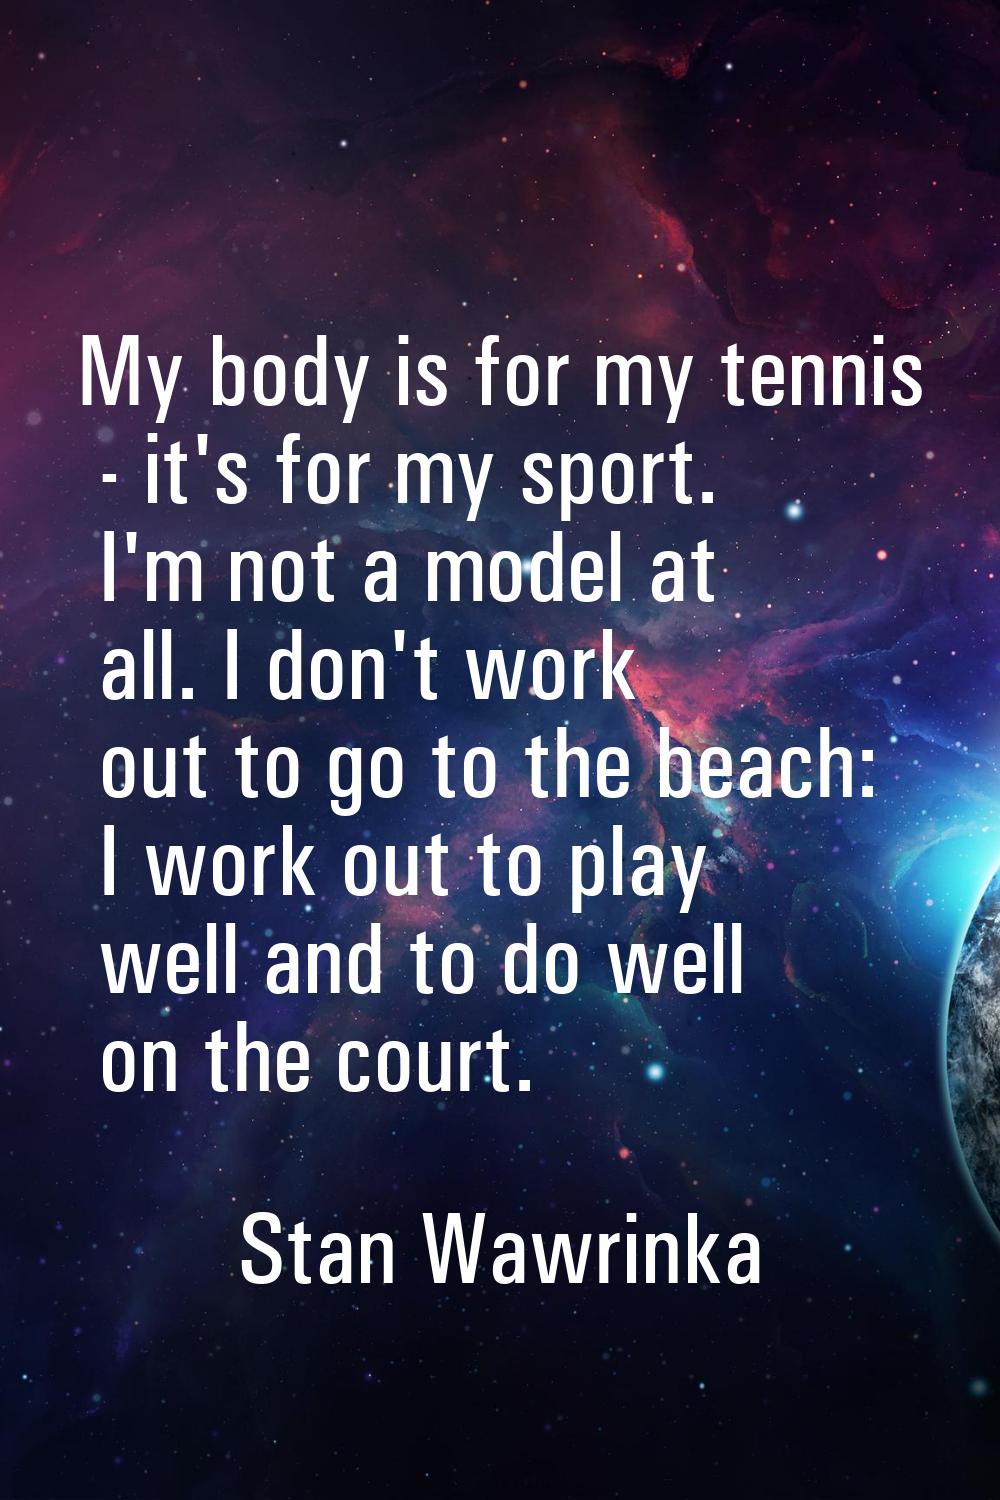 My body is for my tennis - it's for my sport. I'm not a model at all. I don't work out to go to the